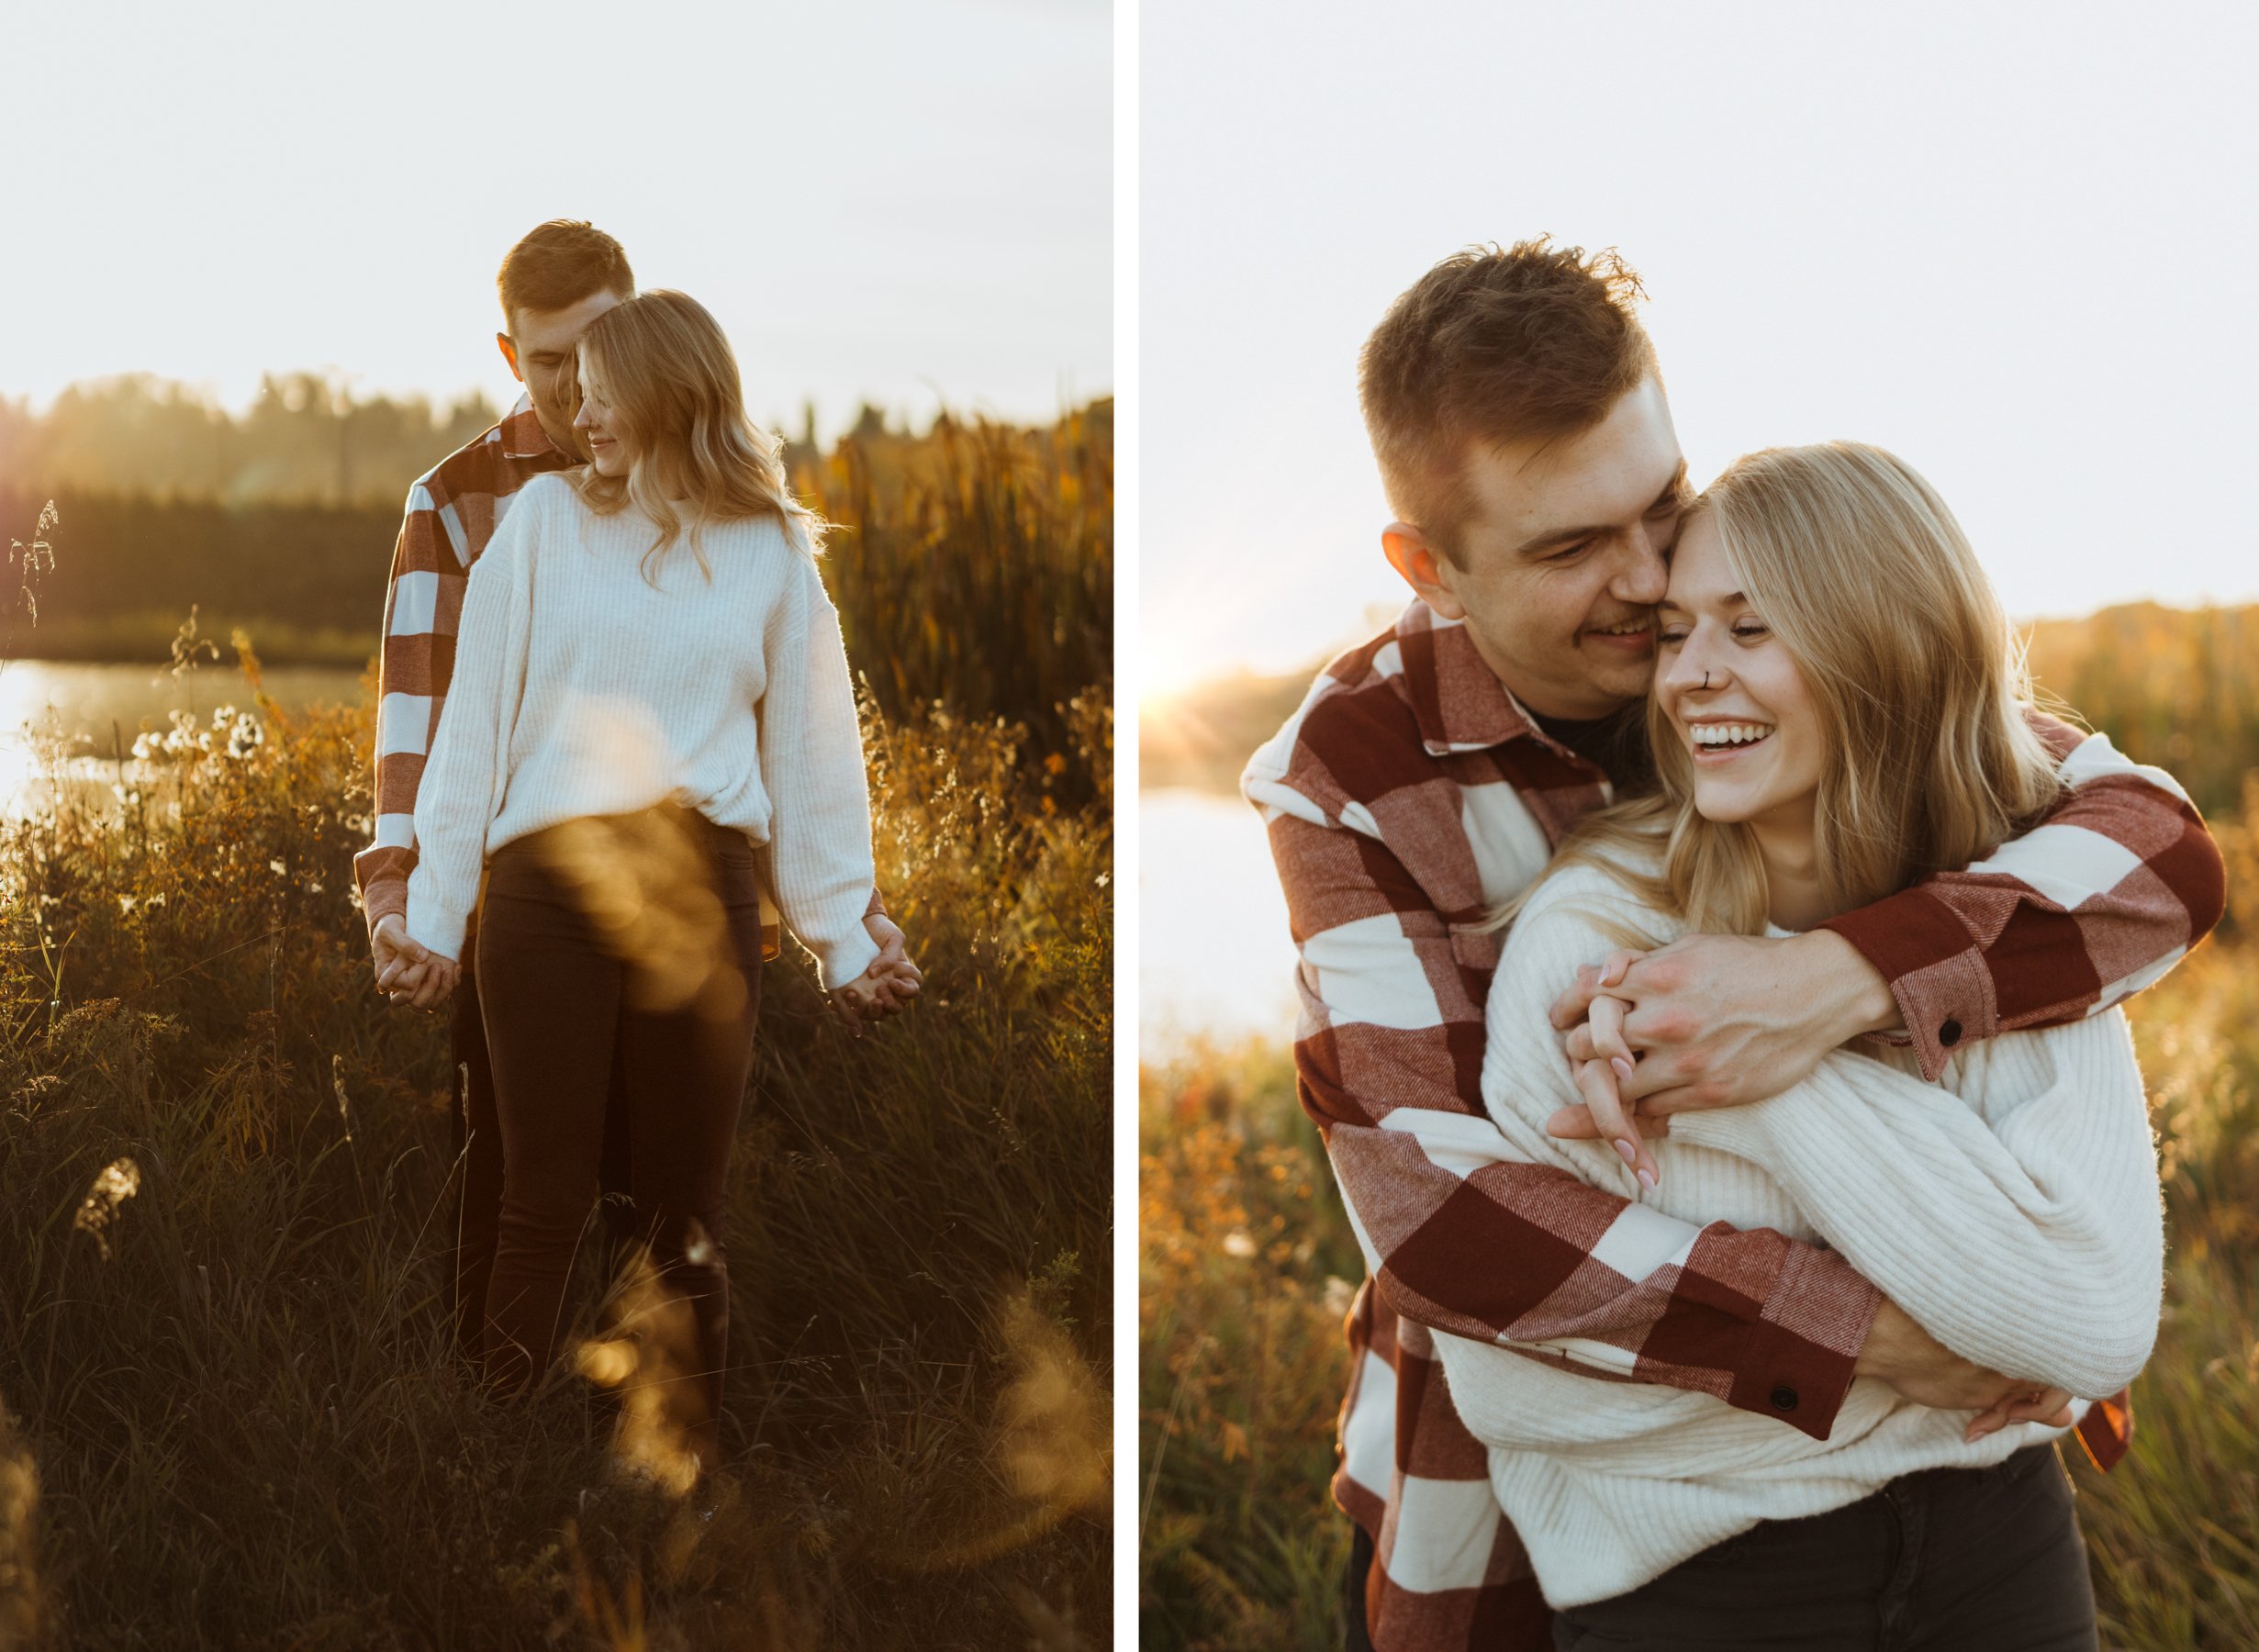 Calgary-wedding-photographer-love-and-be-loved-photography-Matthew-Kyra-Fish-Creek-Park-Fall-Engagement-Session-6.jpg